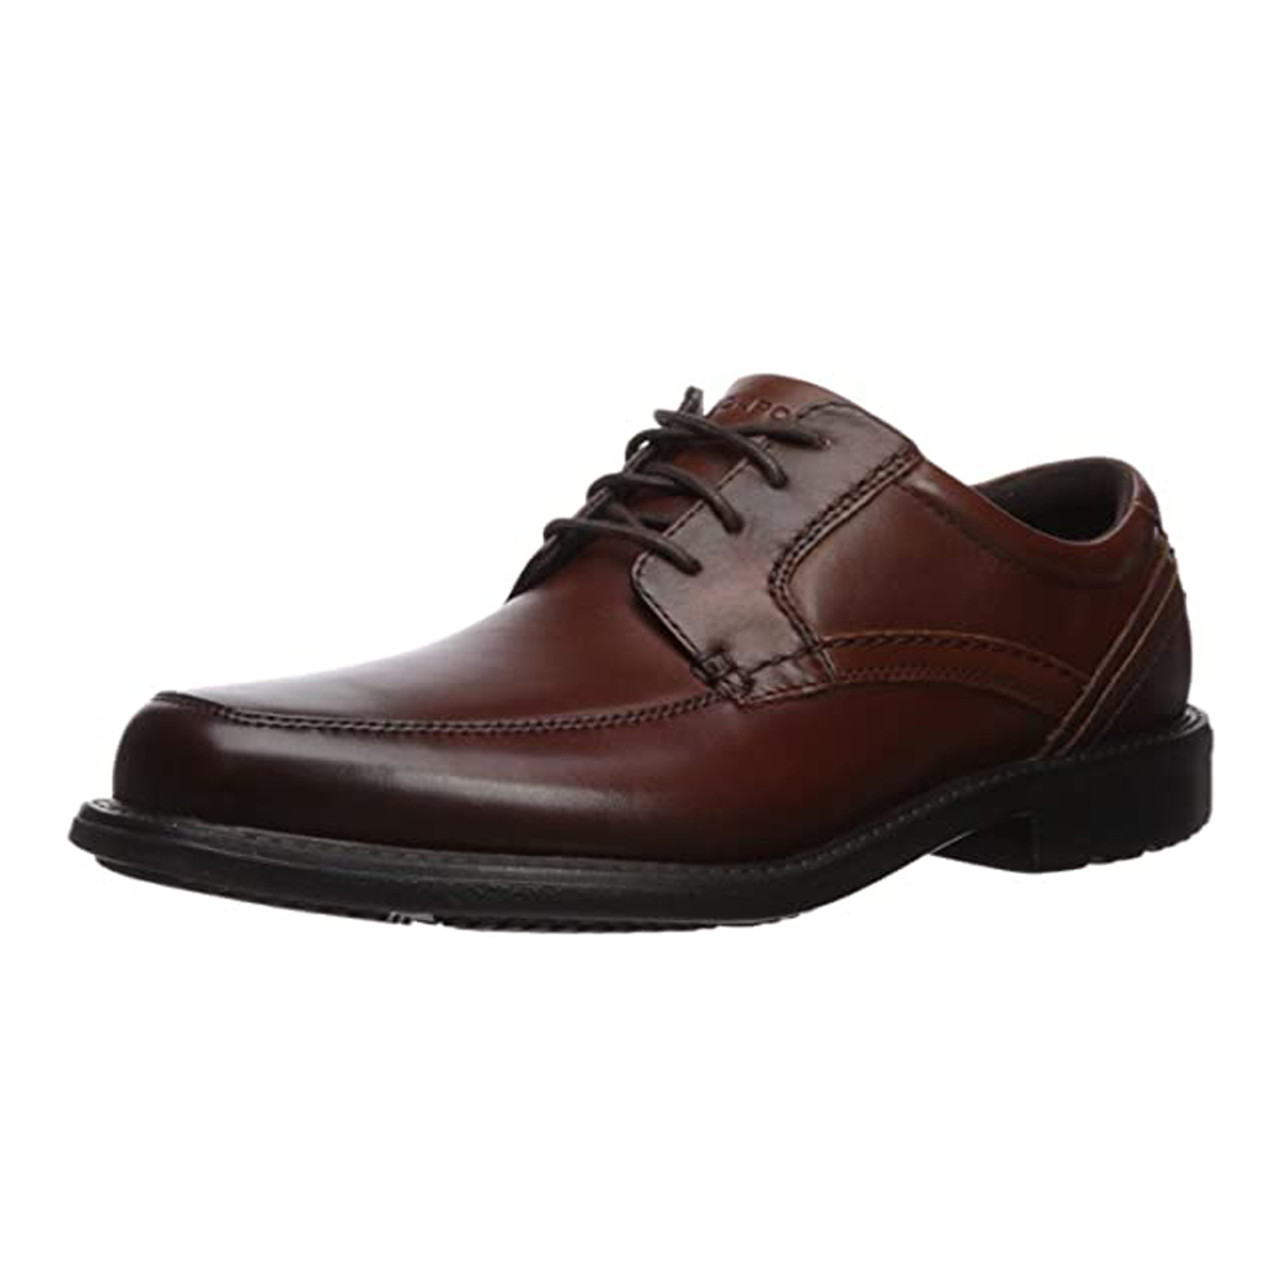 Rockport Men's Style Leader 2 Apron Toe Oxford - Brown | Discount ...